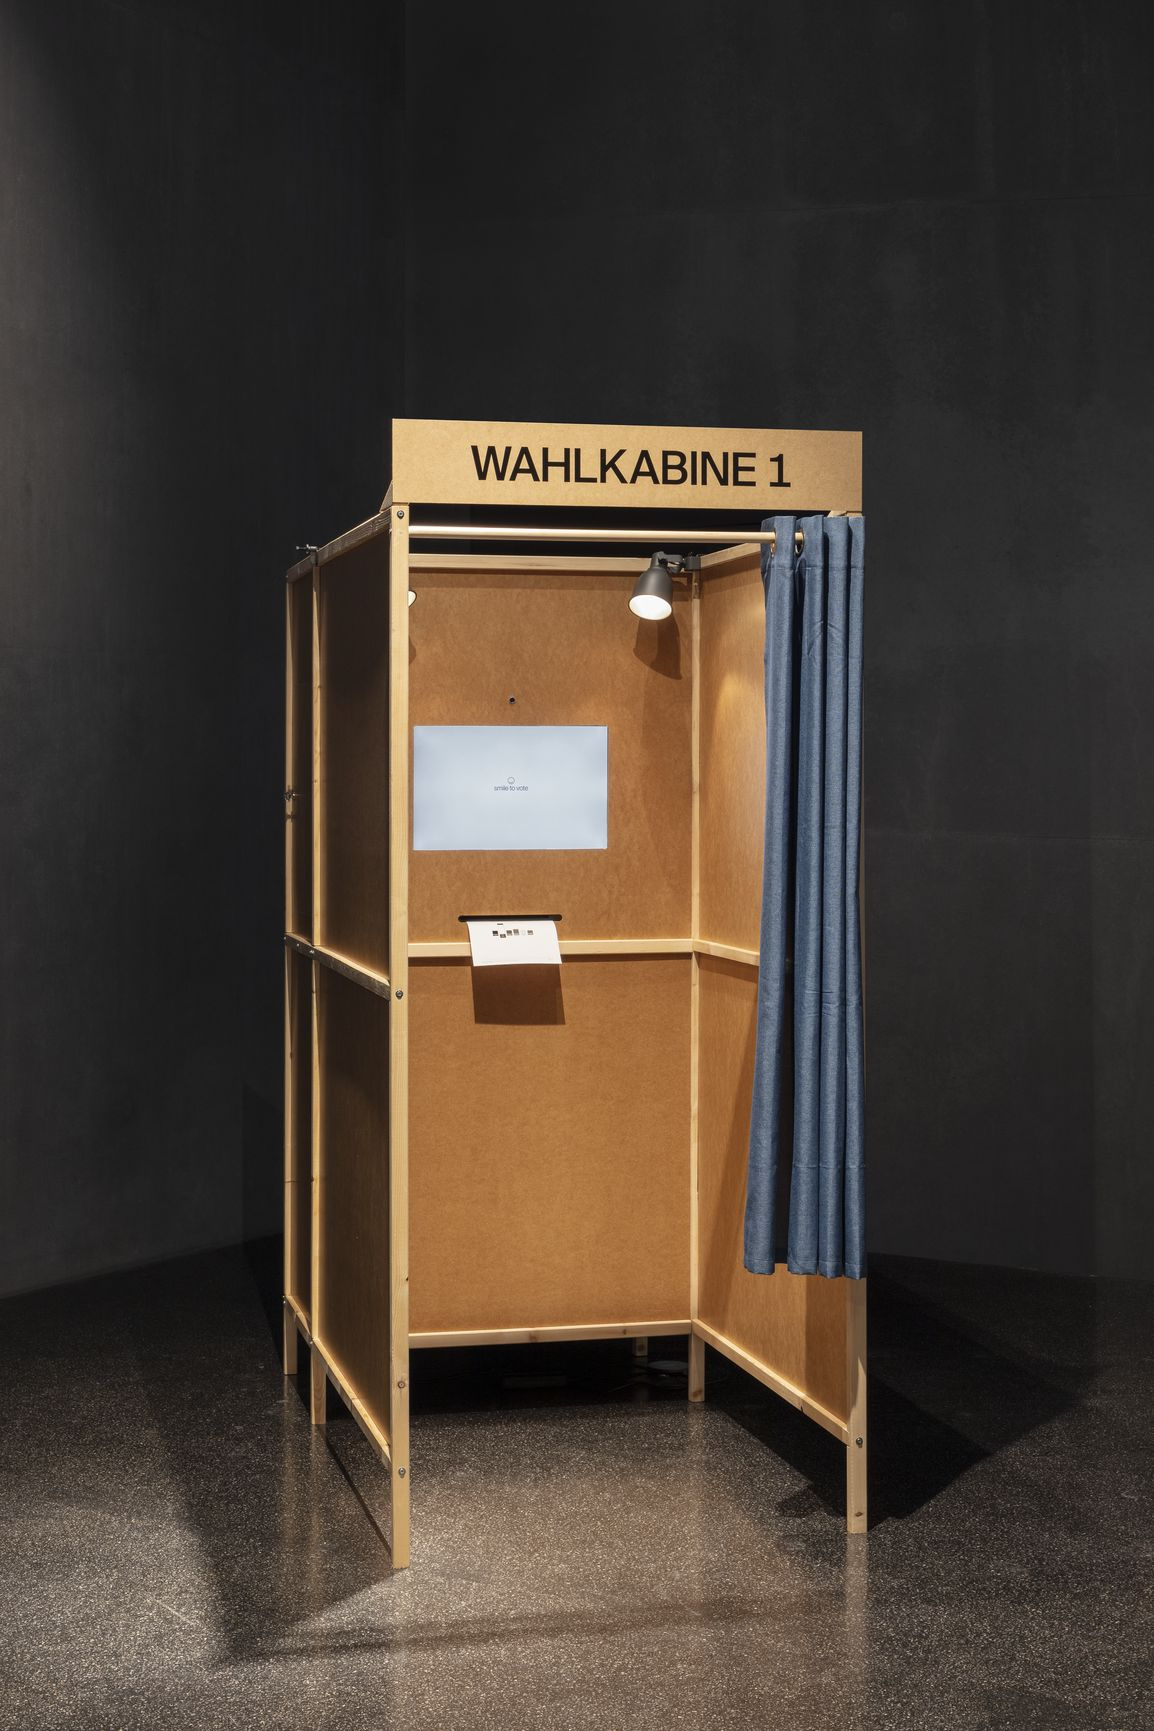 The picture shows a wooden voting booth with a blue curtain. It is part of the artwork "Smile to Vote - Political Physiognomy Analytics", an artistic-scientific research project that explores the impact of AI-based biometric scoring methods on democratic 